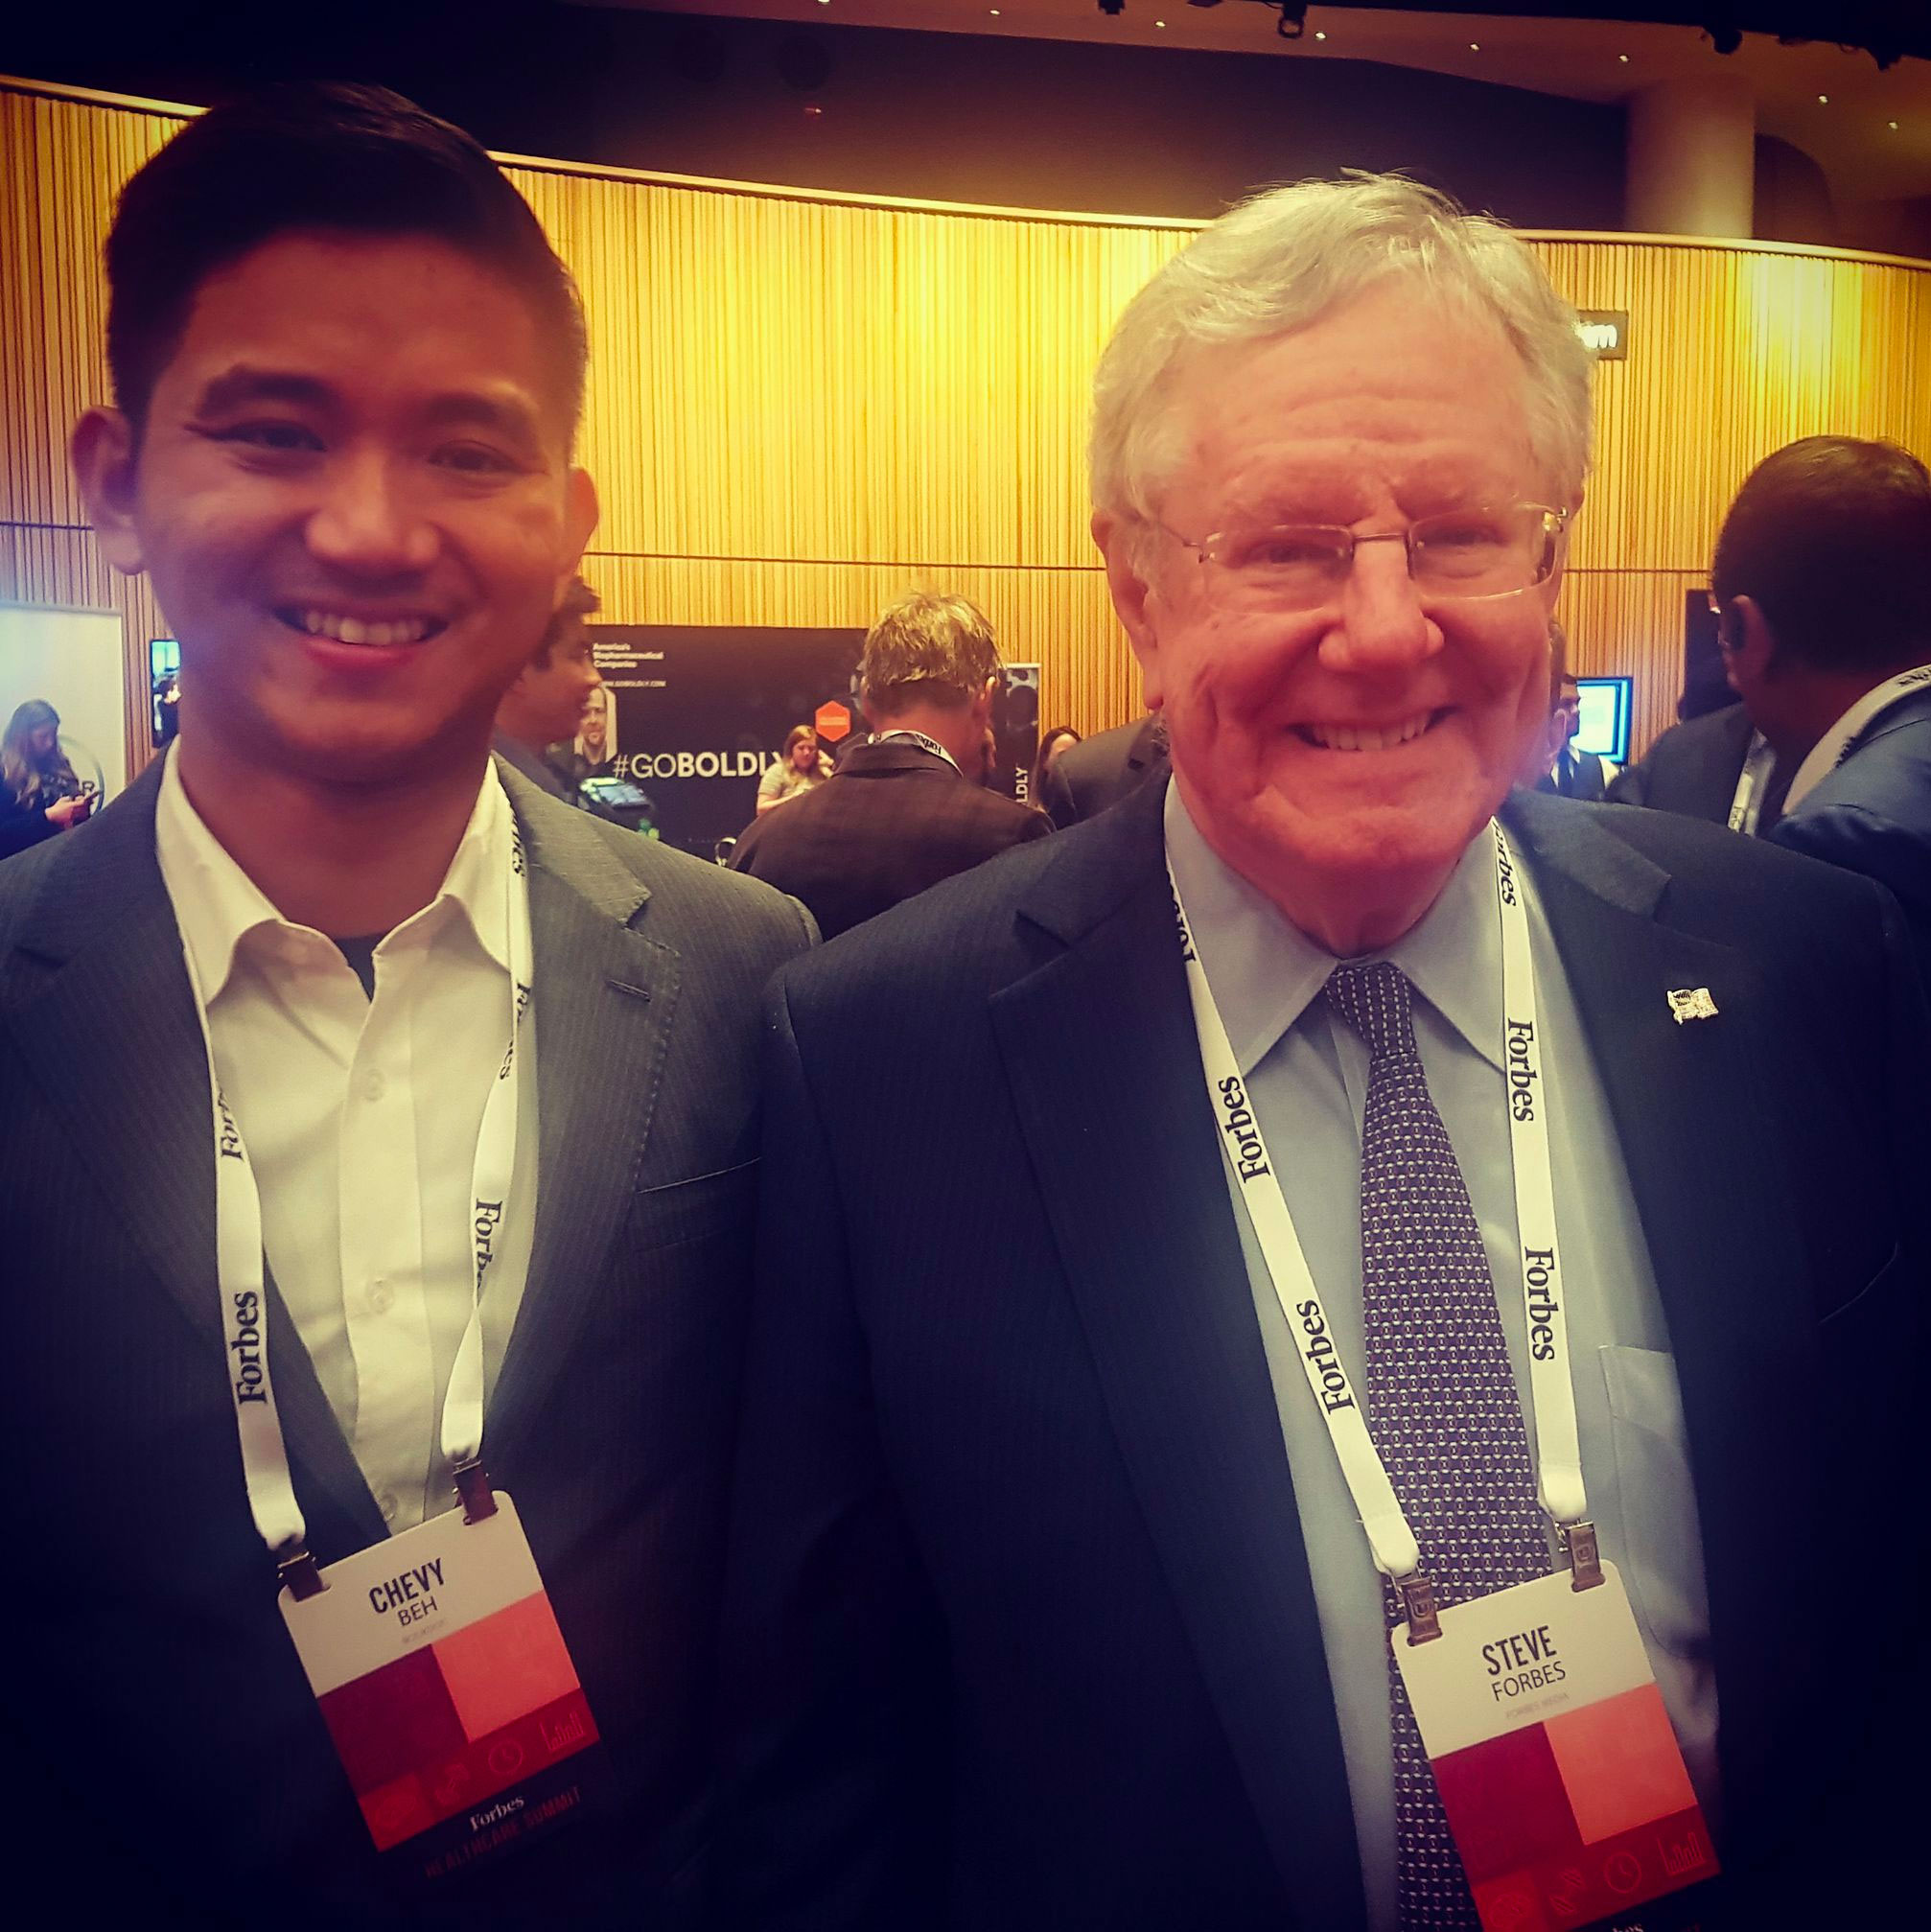 BookDoc Founder together with Steve Forbes, Chairman of Forbes Magazine